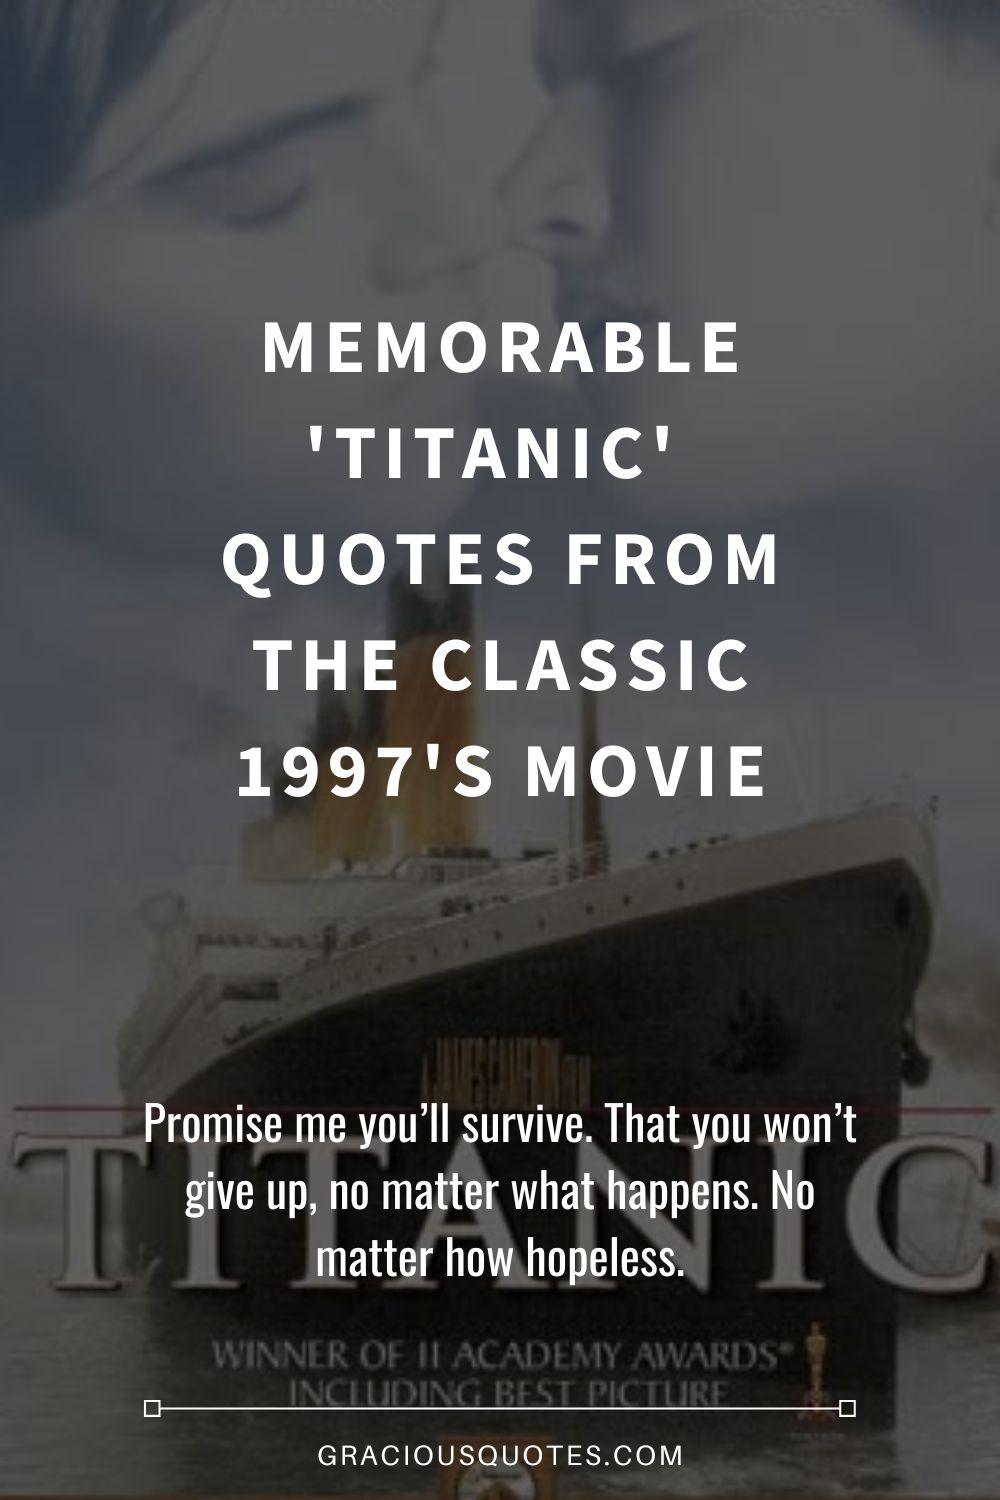 Memorable 'Titanic' Quotes from the Classic 1997's Movie - Gracious Quotes